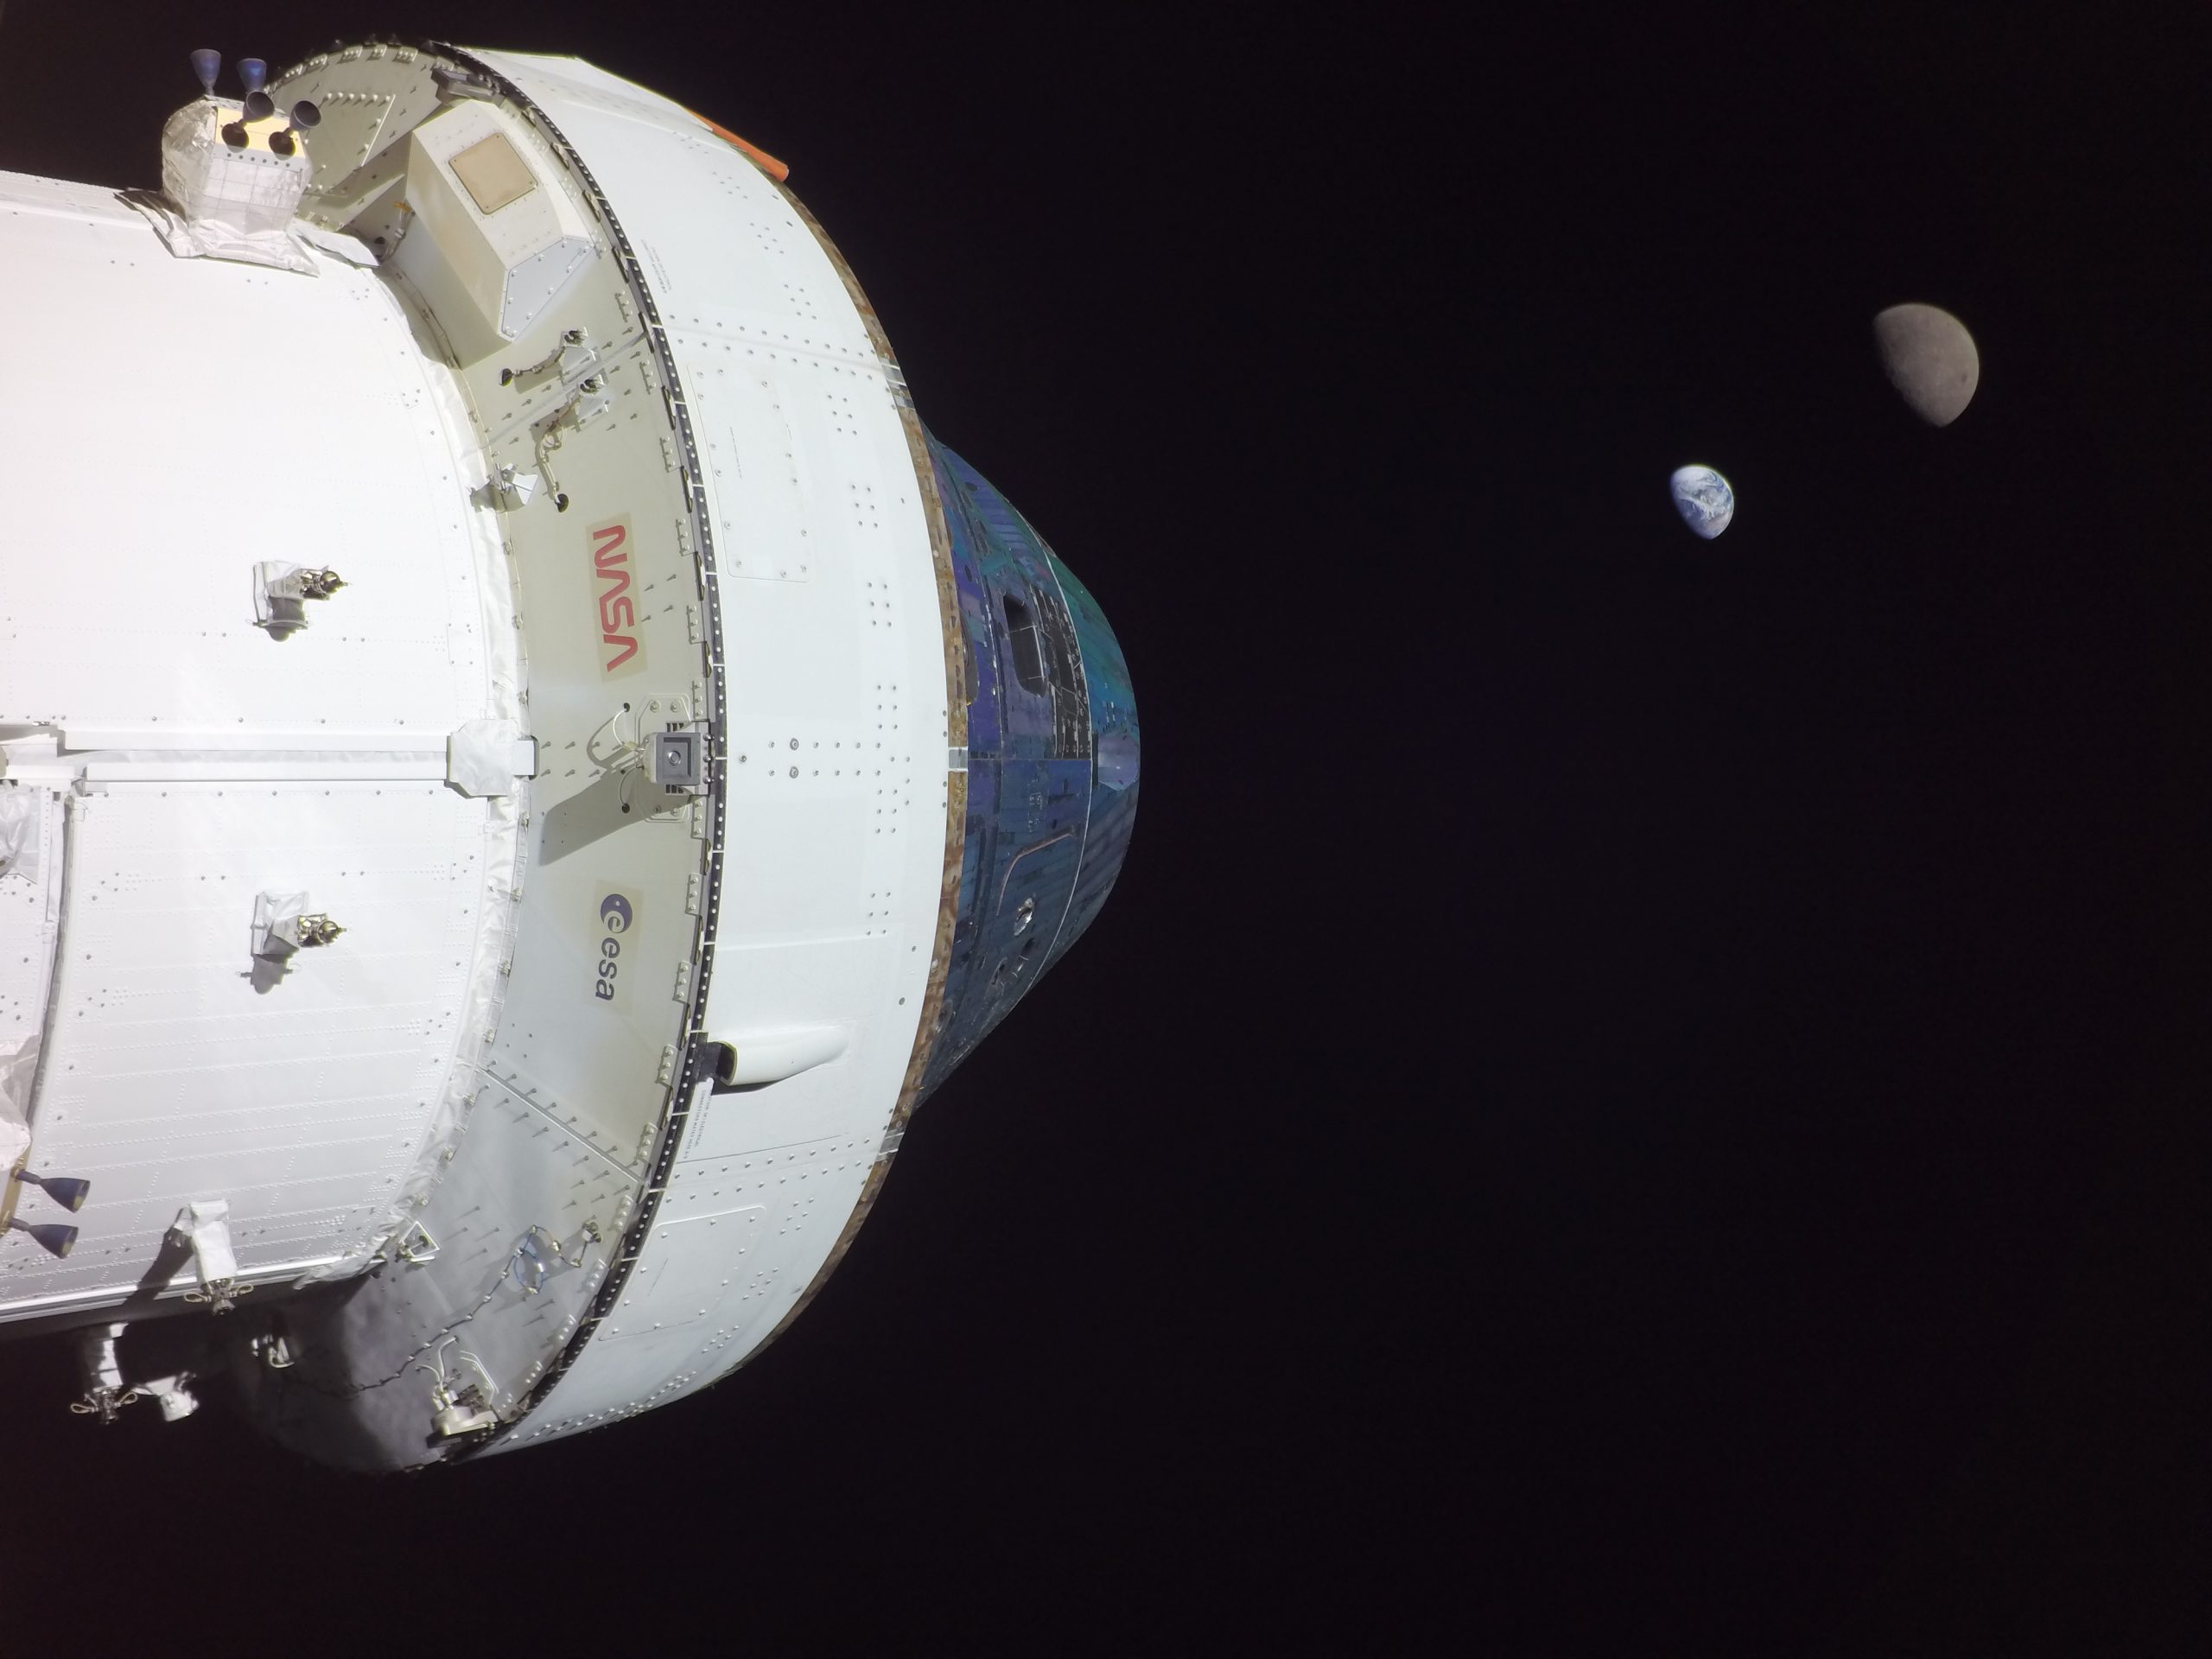 A family portrait of the Moon, Earth, and the Orion vehicle powered by the European Service Module, captured during Artemis I. Credit: NASA 